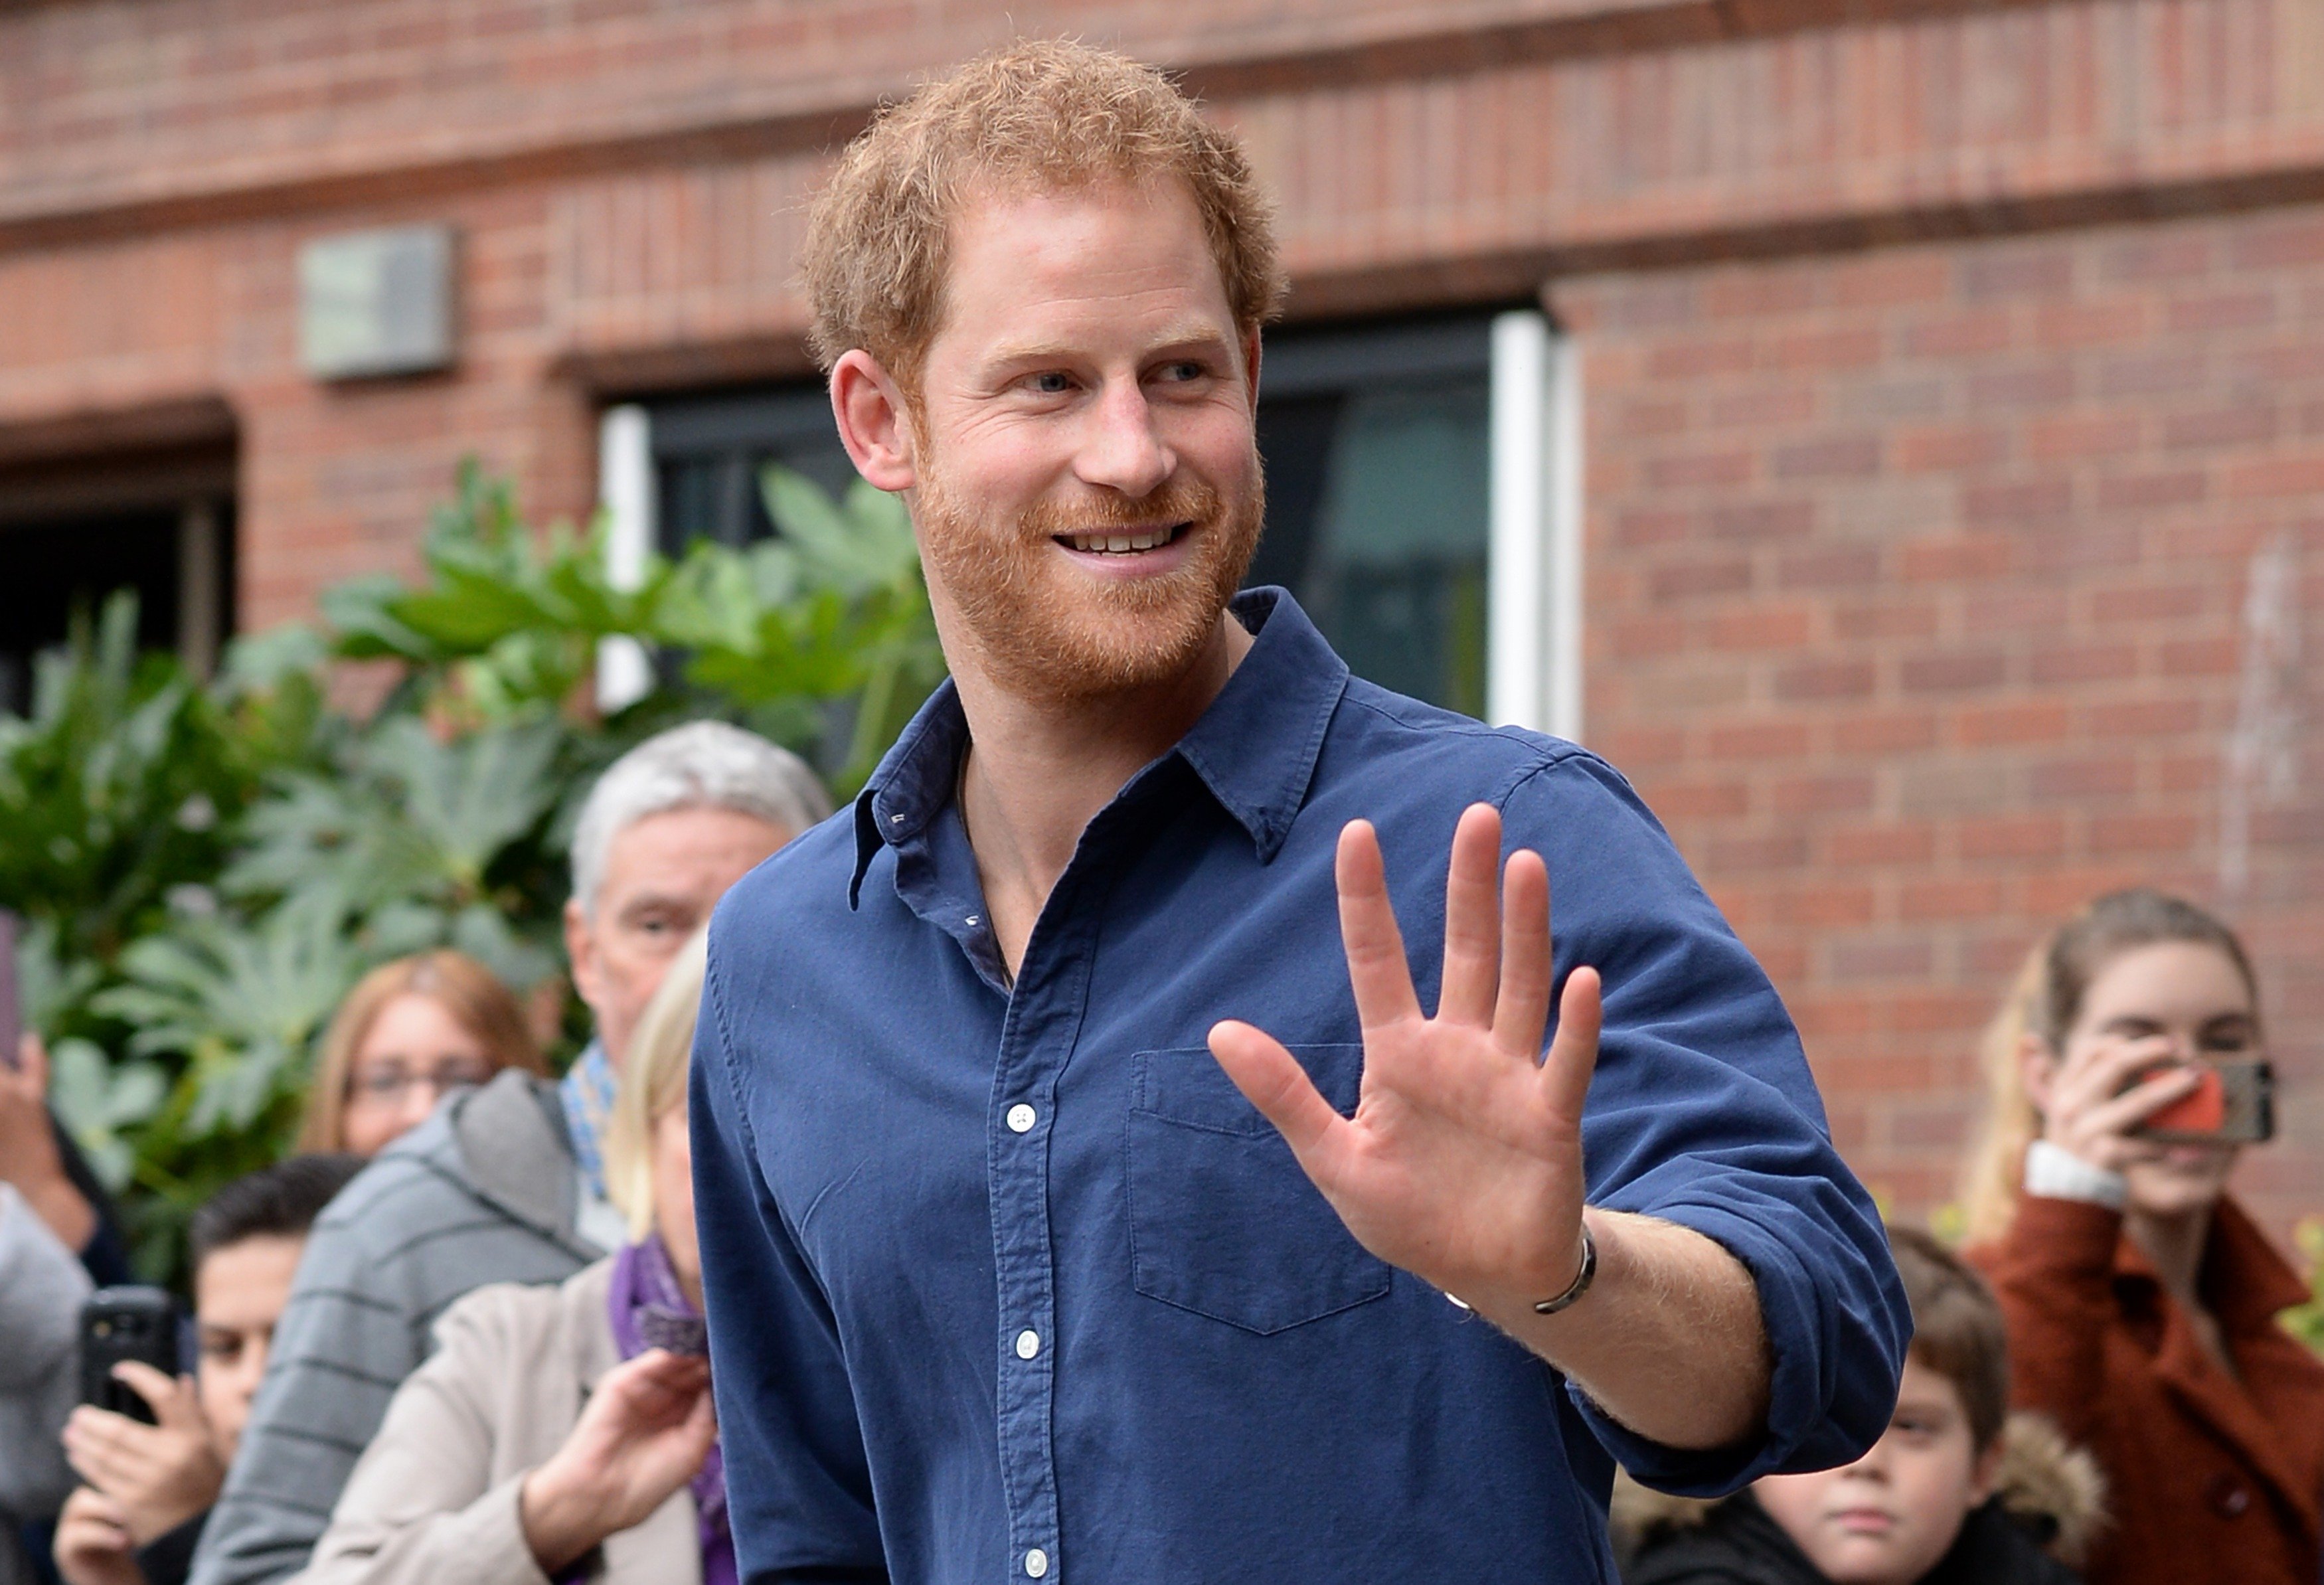 Prince Harry waves to the crowd and smiles.